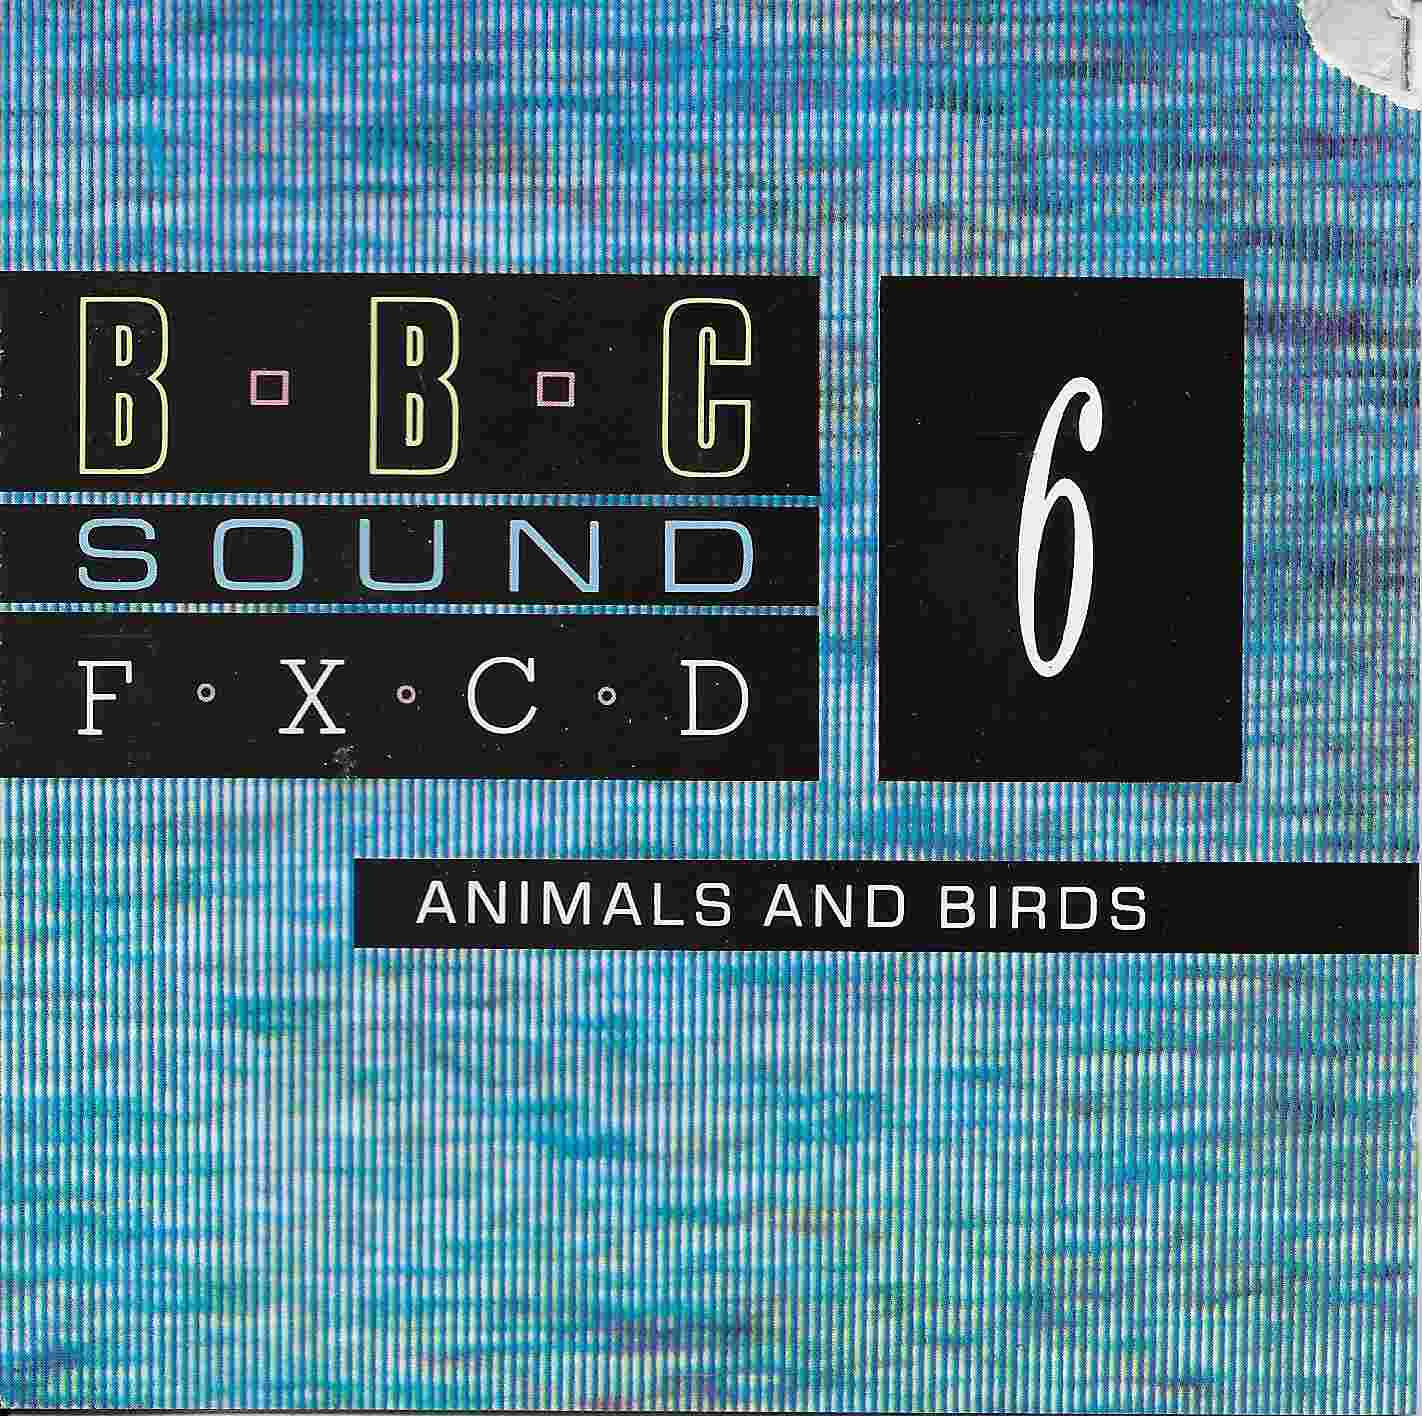 Picture of Animals and birds by artist Various from the BBC cds - Records and Tapes library